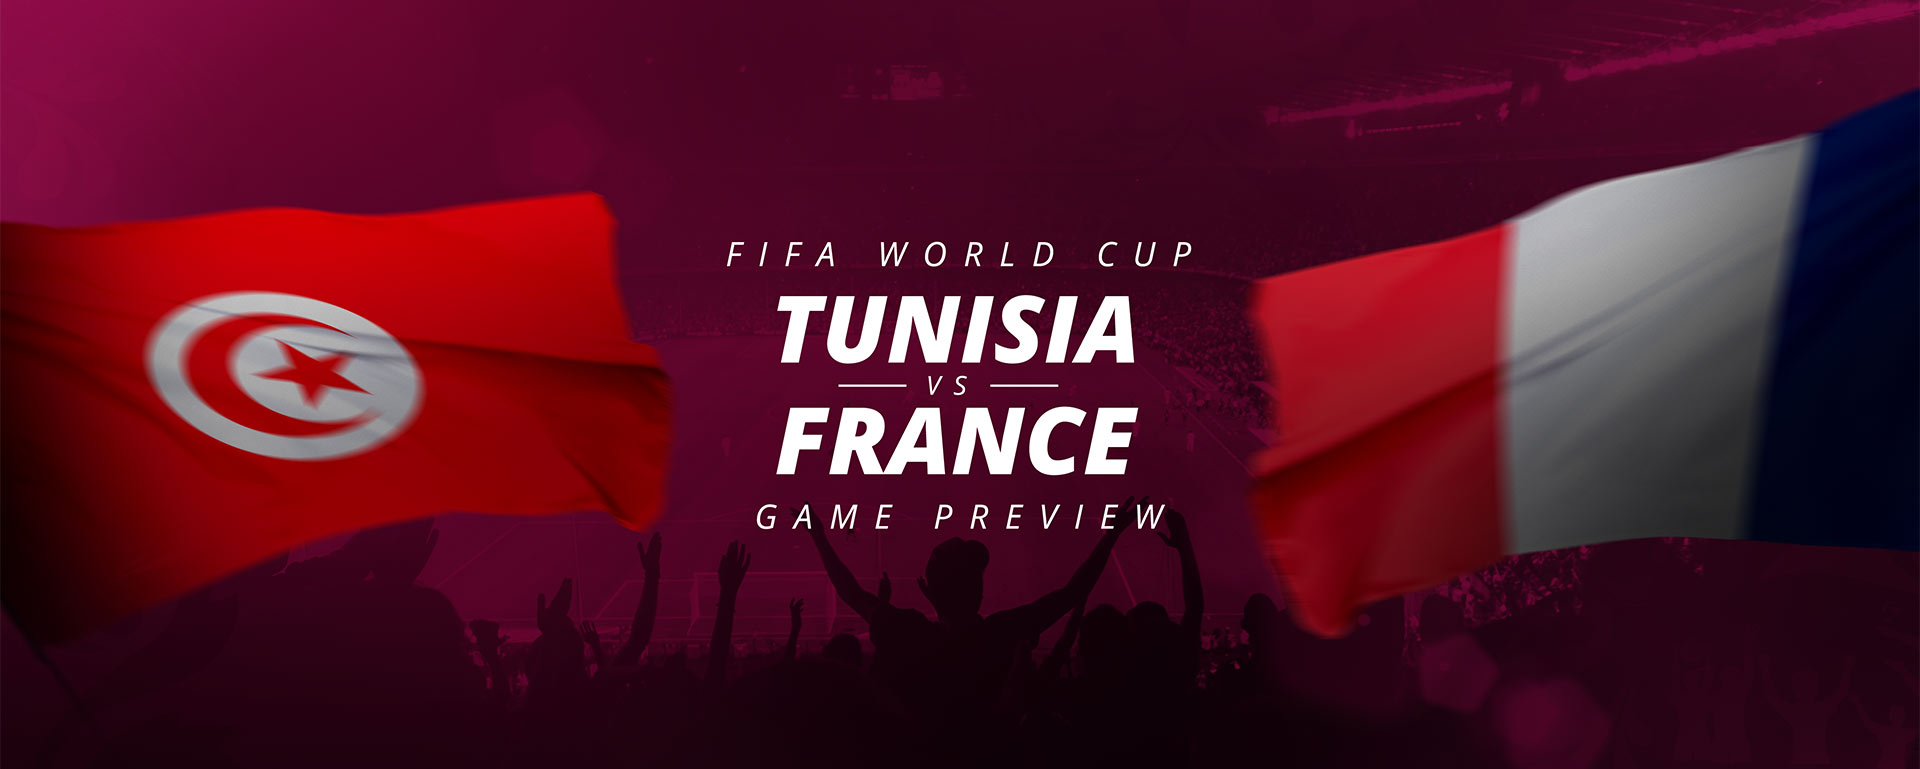 FIFA WORLD CUP: TUNISIA V FRANCE – GAME PREVIEW